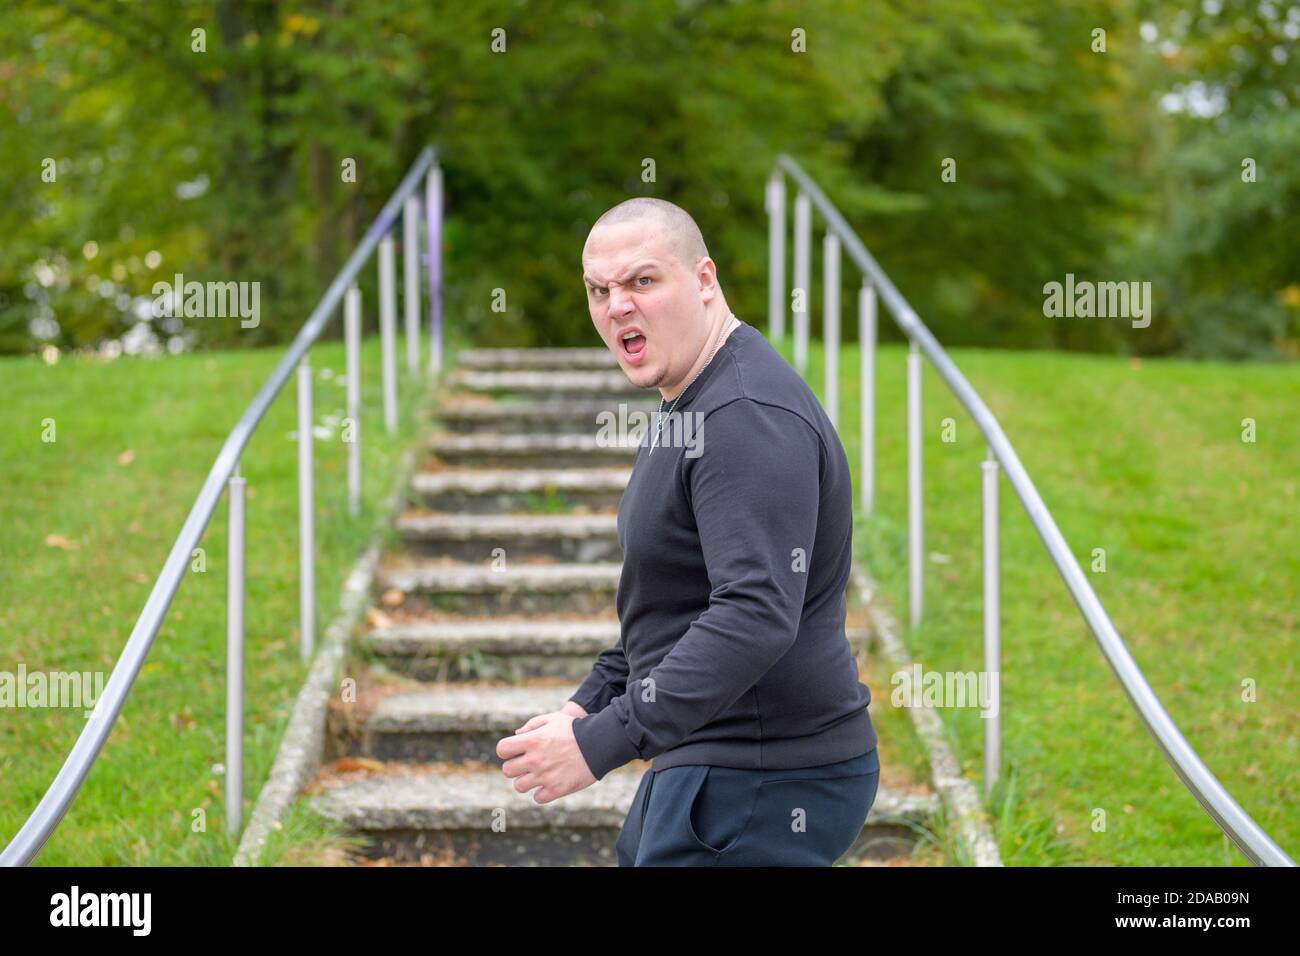 Angry aggressive young man turning to yell at the camera with a look of fury as he walks up steps in a green park Stock Photo